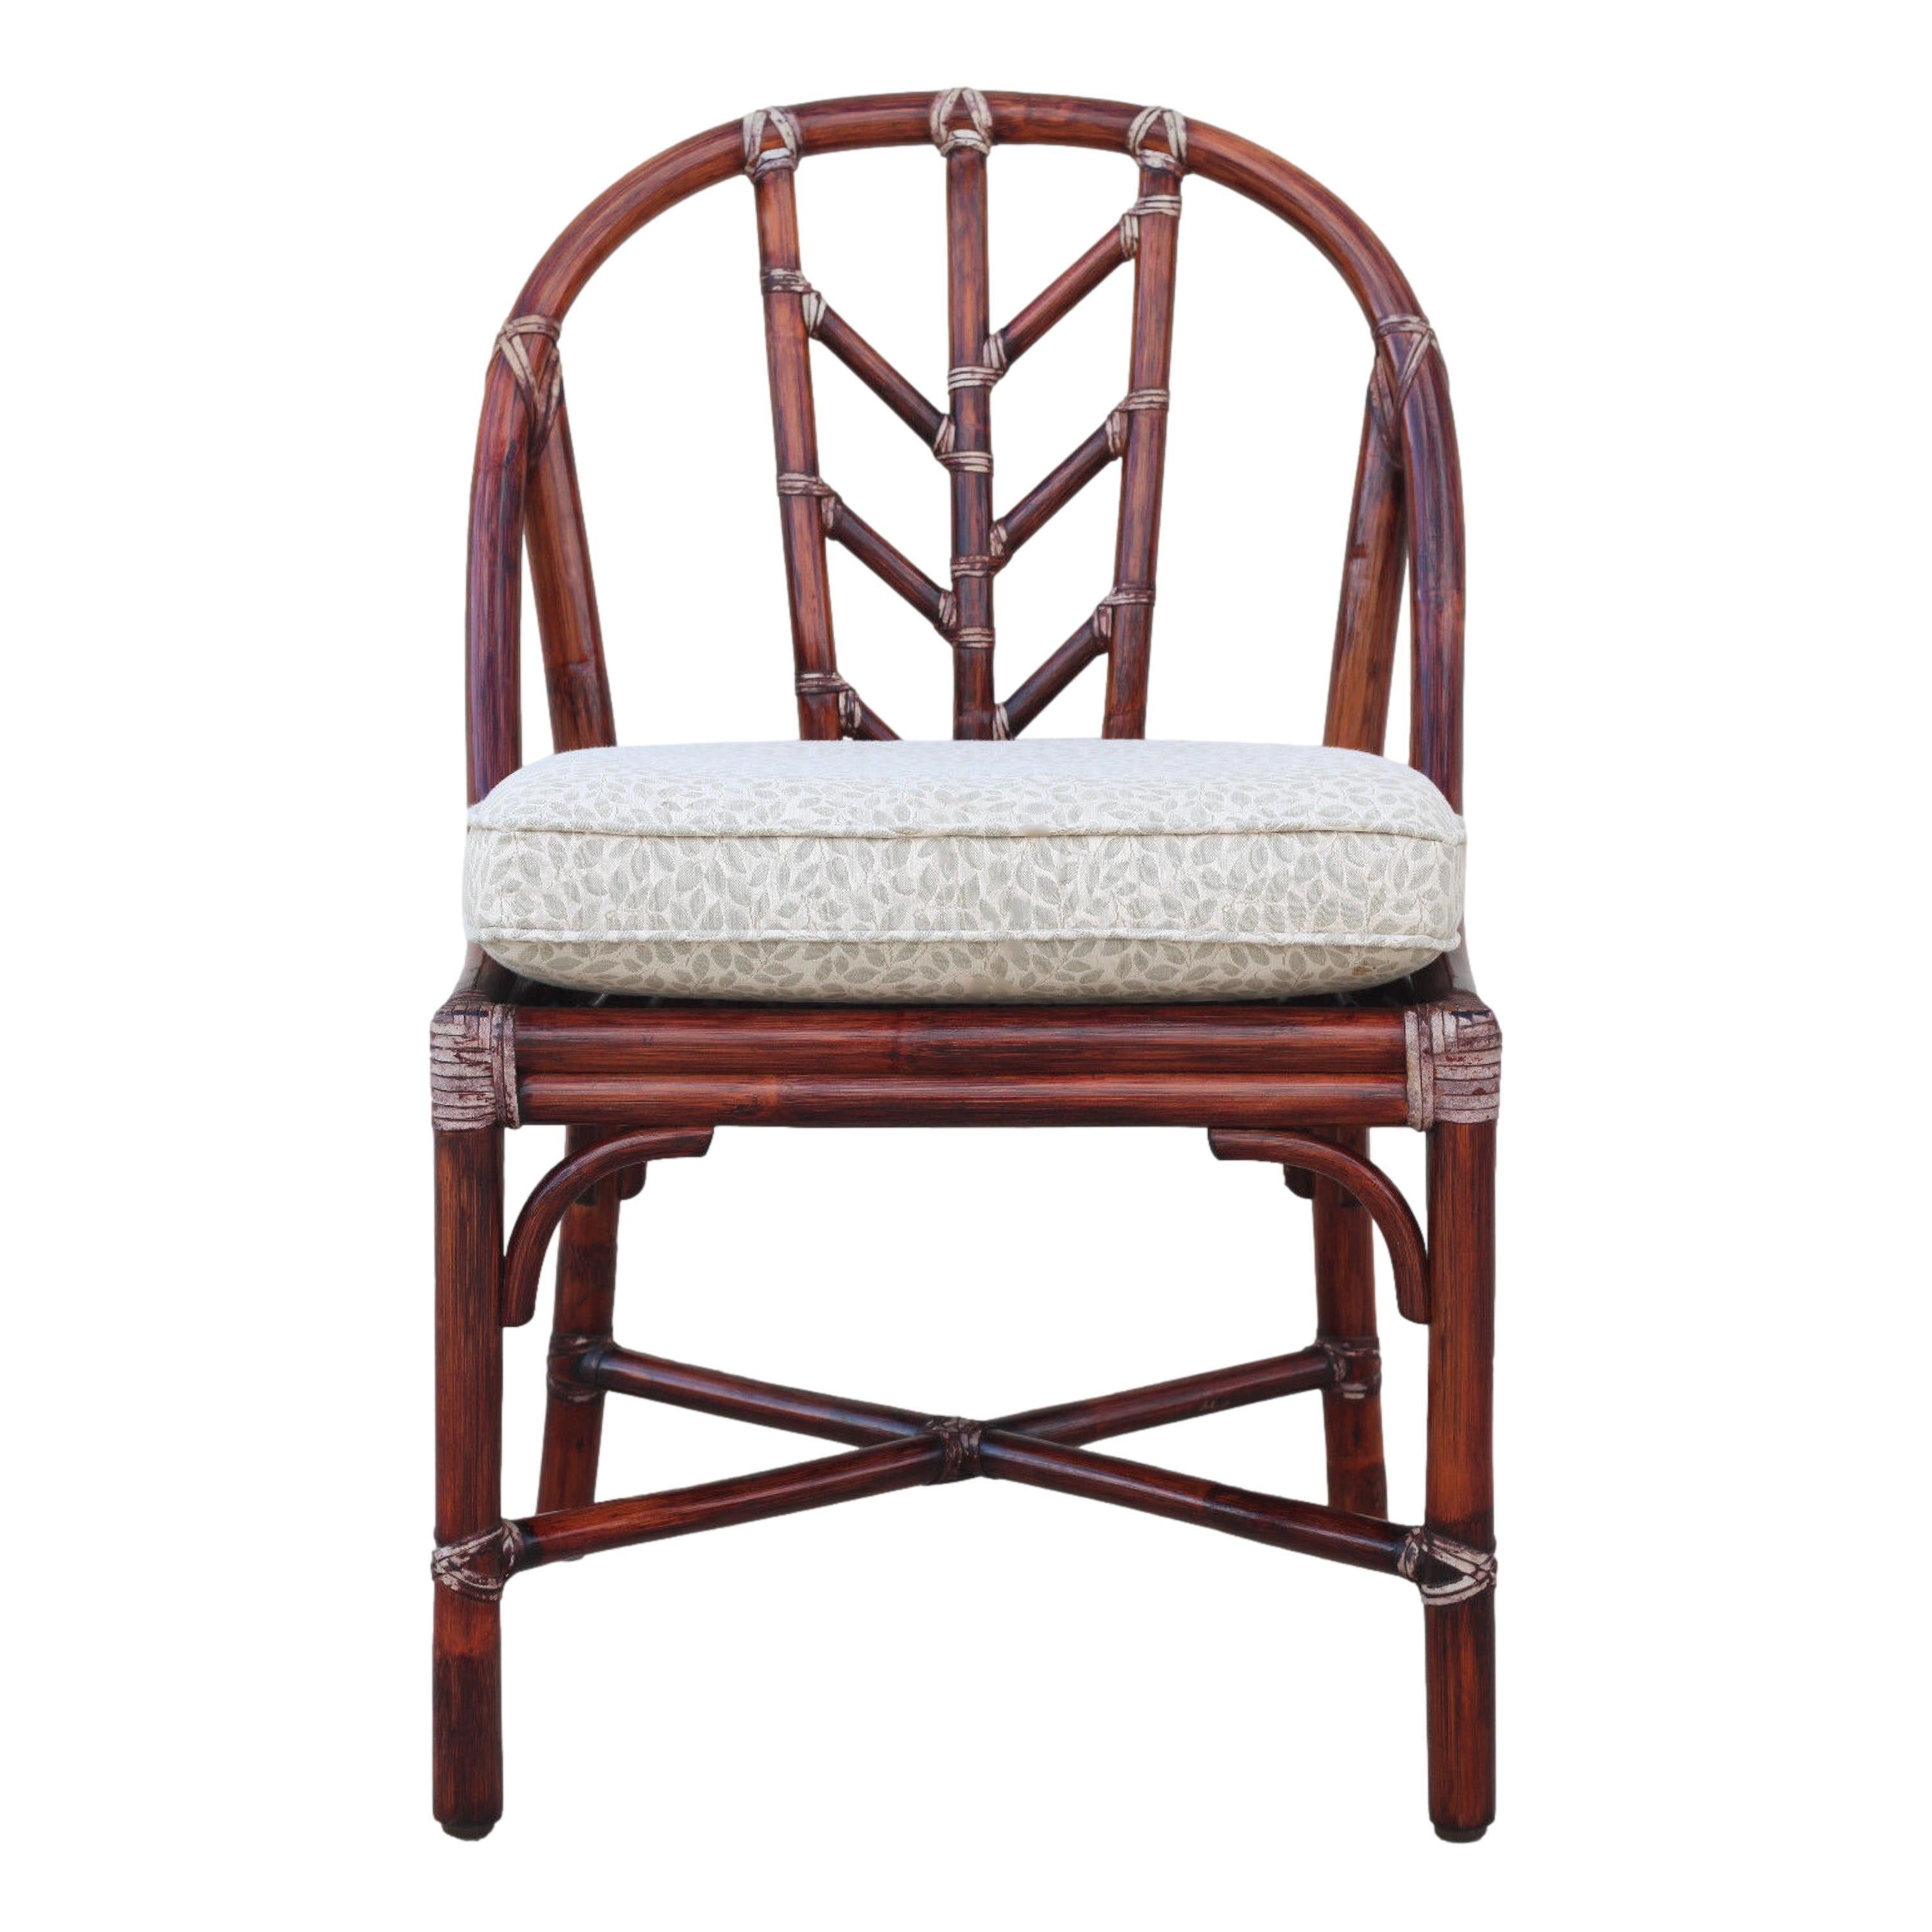 Elinor McGuire for McGuire San Francisco Rattan Dining Chairs, a Pair In Good Condition For Sale In Vero Beach, FL